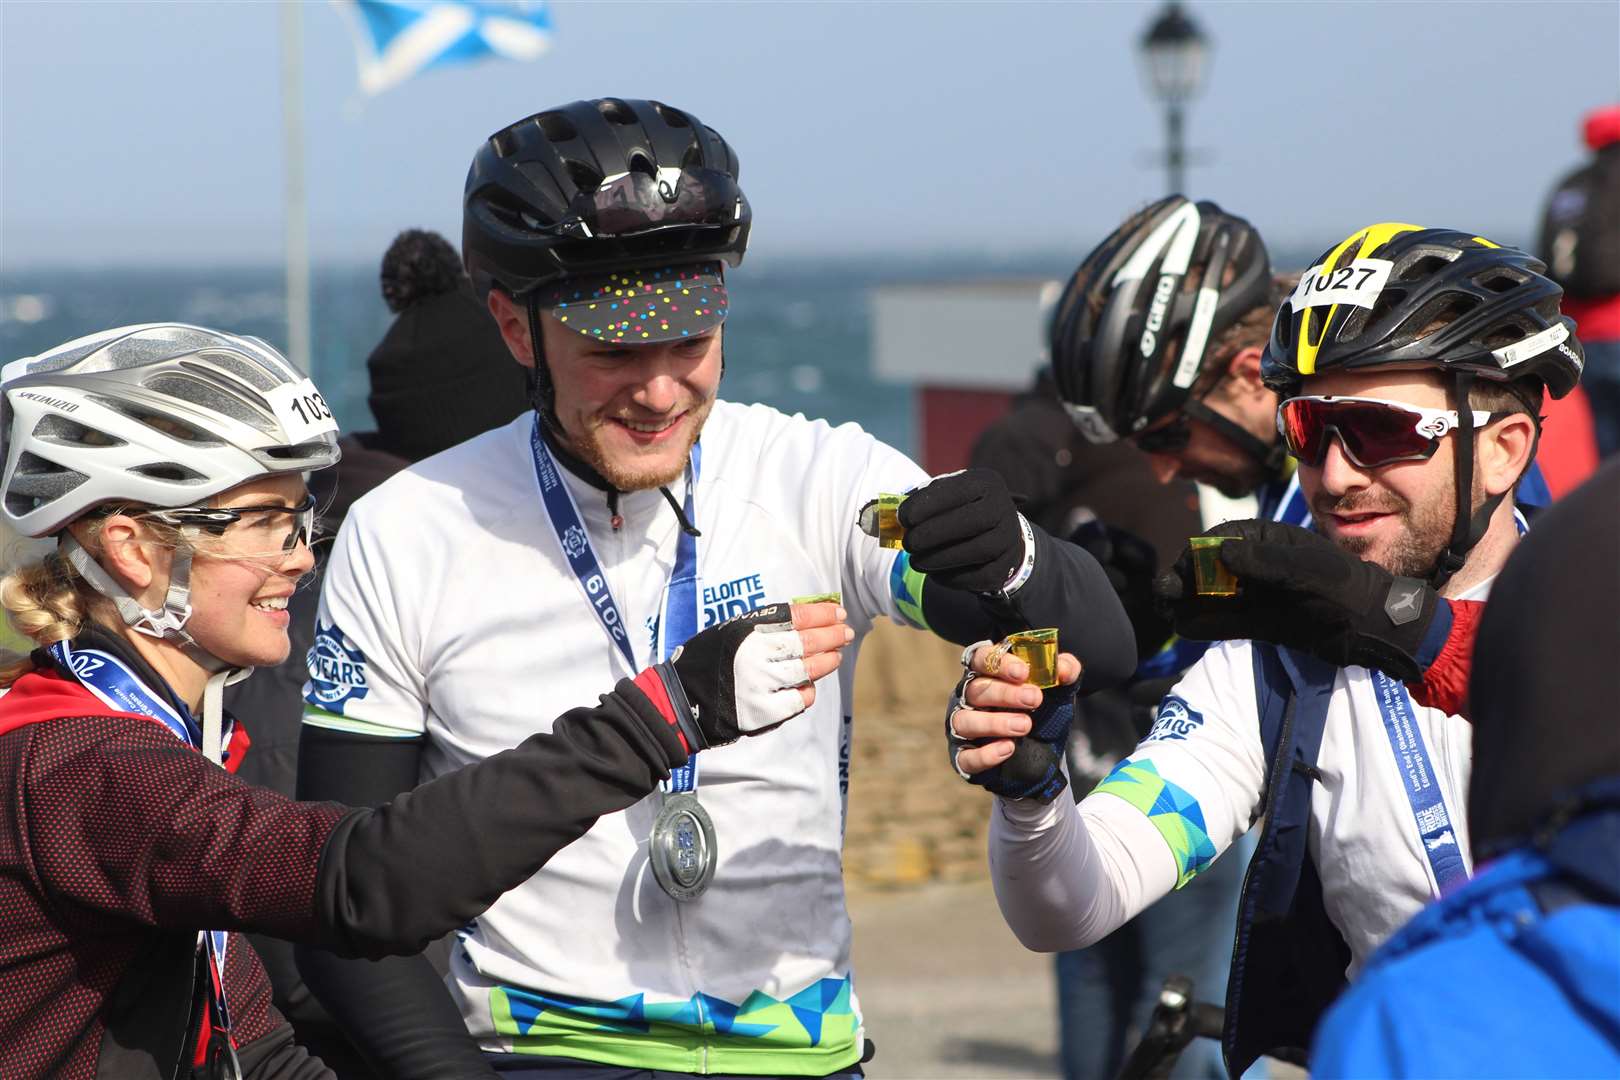 Three of the cyclists share a celebratory drink after completing the Deloitte Ride Across Britain 2019 at John O'Groats. Picture: Alan Hendry